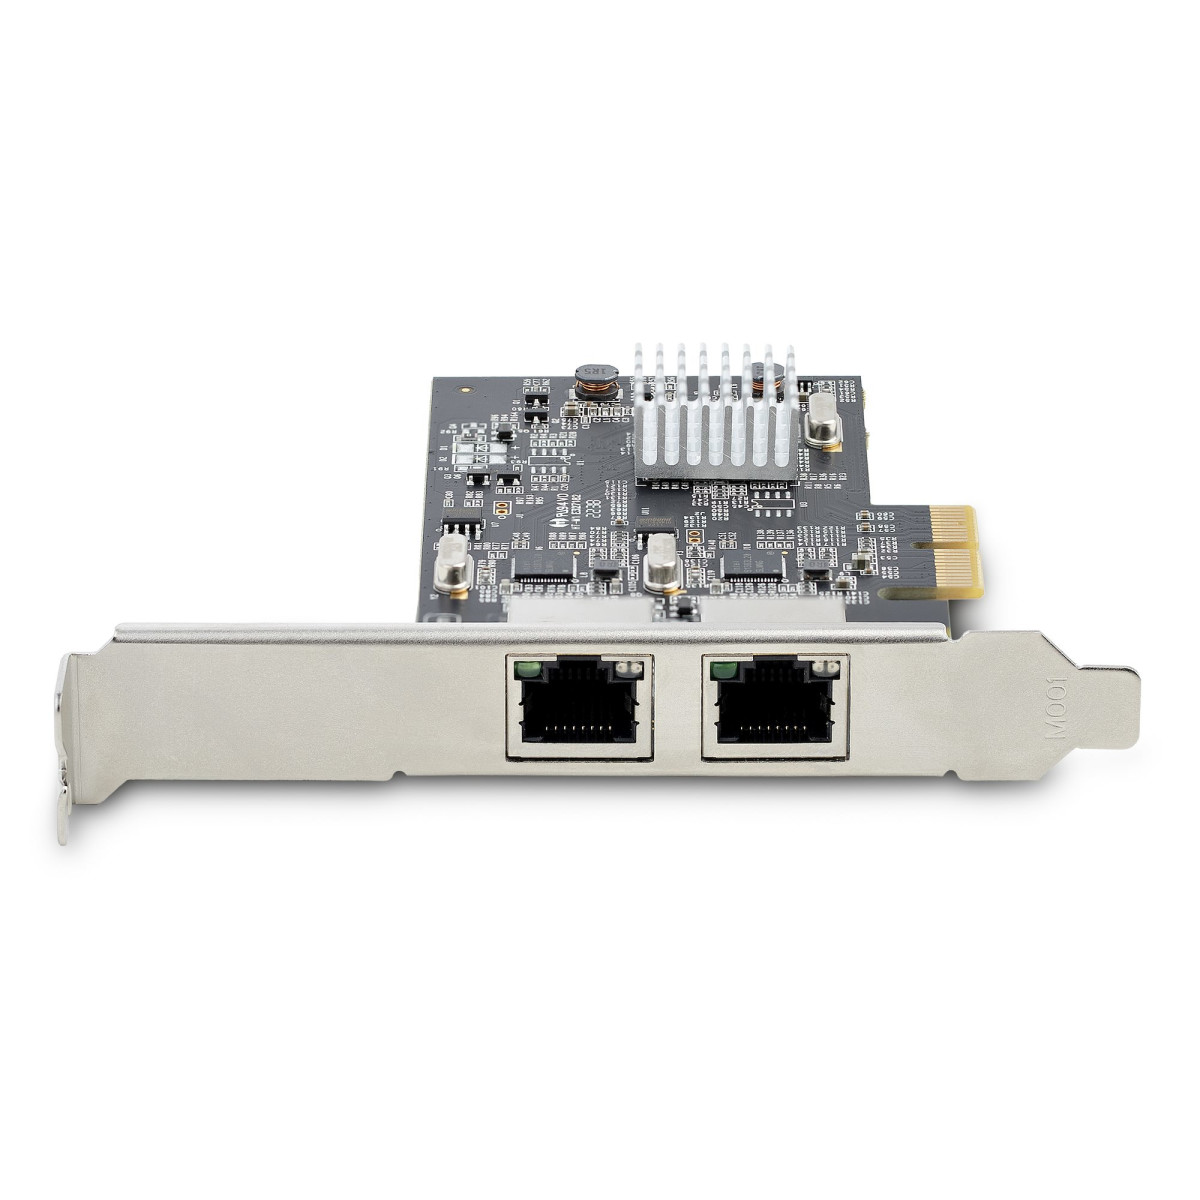 2-Port NBASE-T 2.5Gbps PCIe Network Card